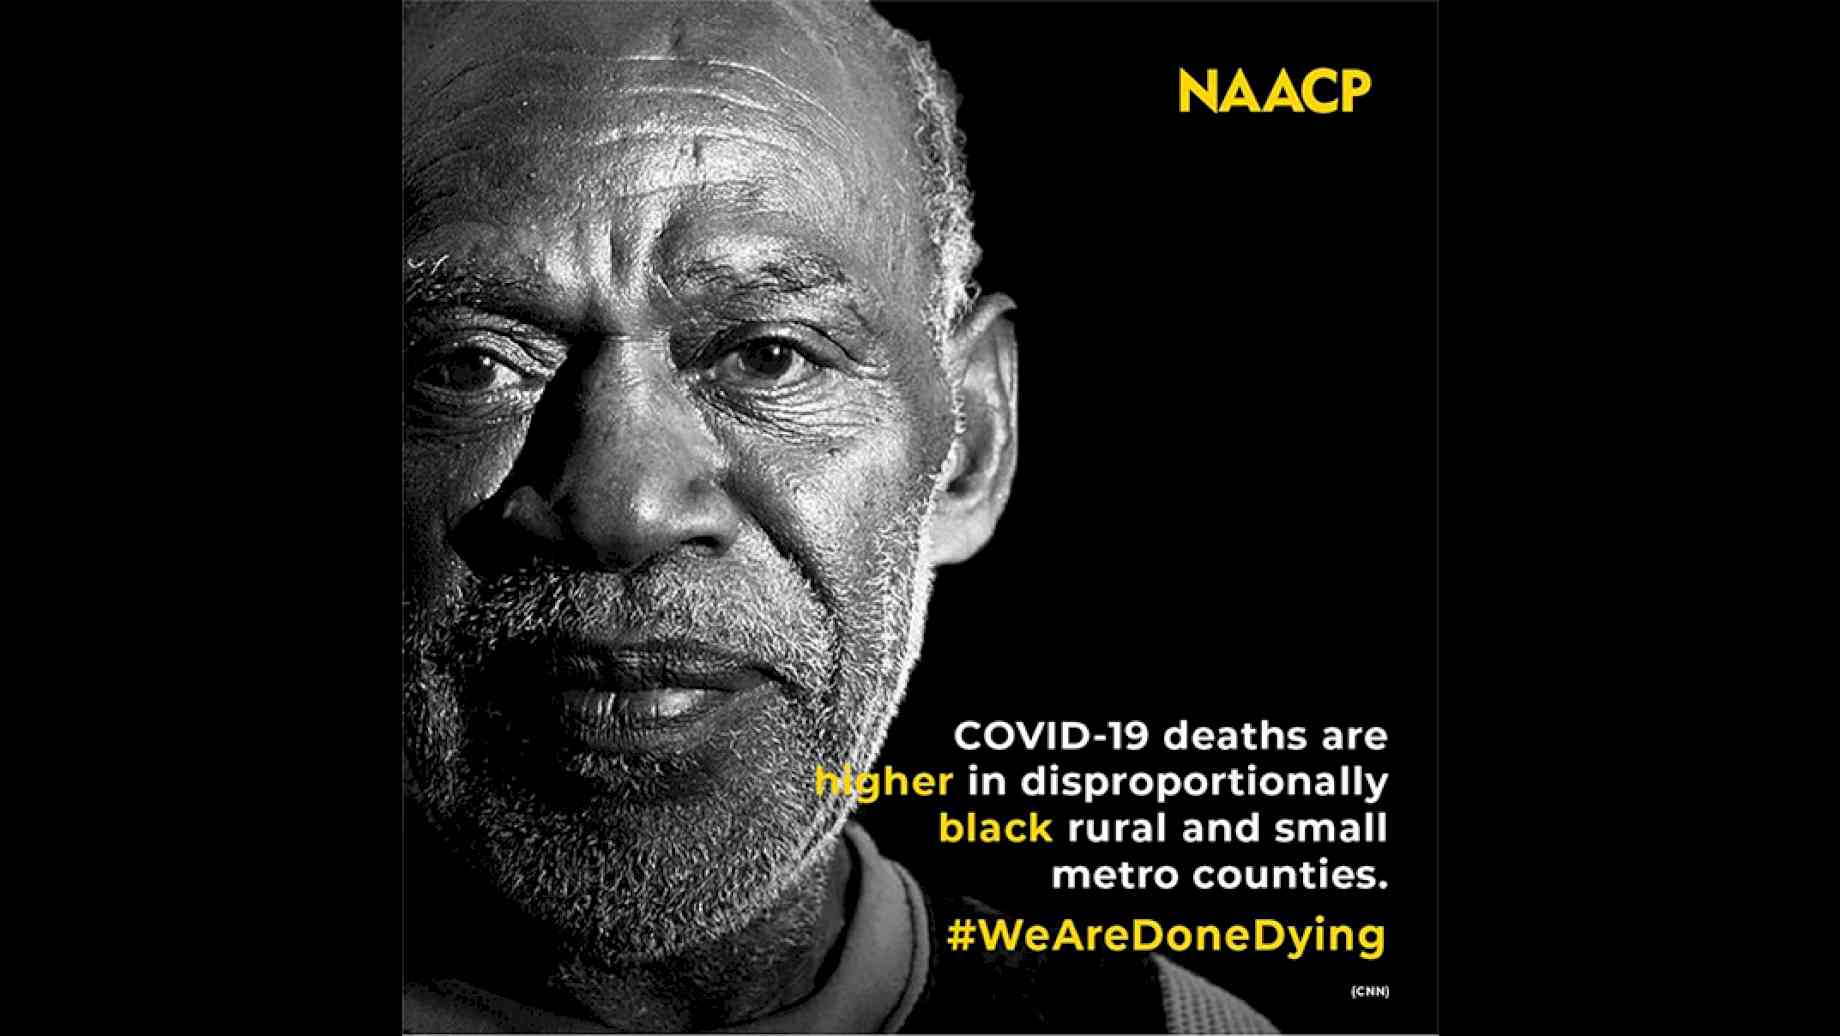 A black and white photo of an elderly Man of Color. At the bottom right of the image, the words "COVID-19 deaths are higher in disproportionately black rural and small metro communities. #wearedonedying."